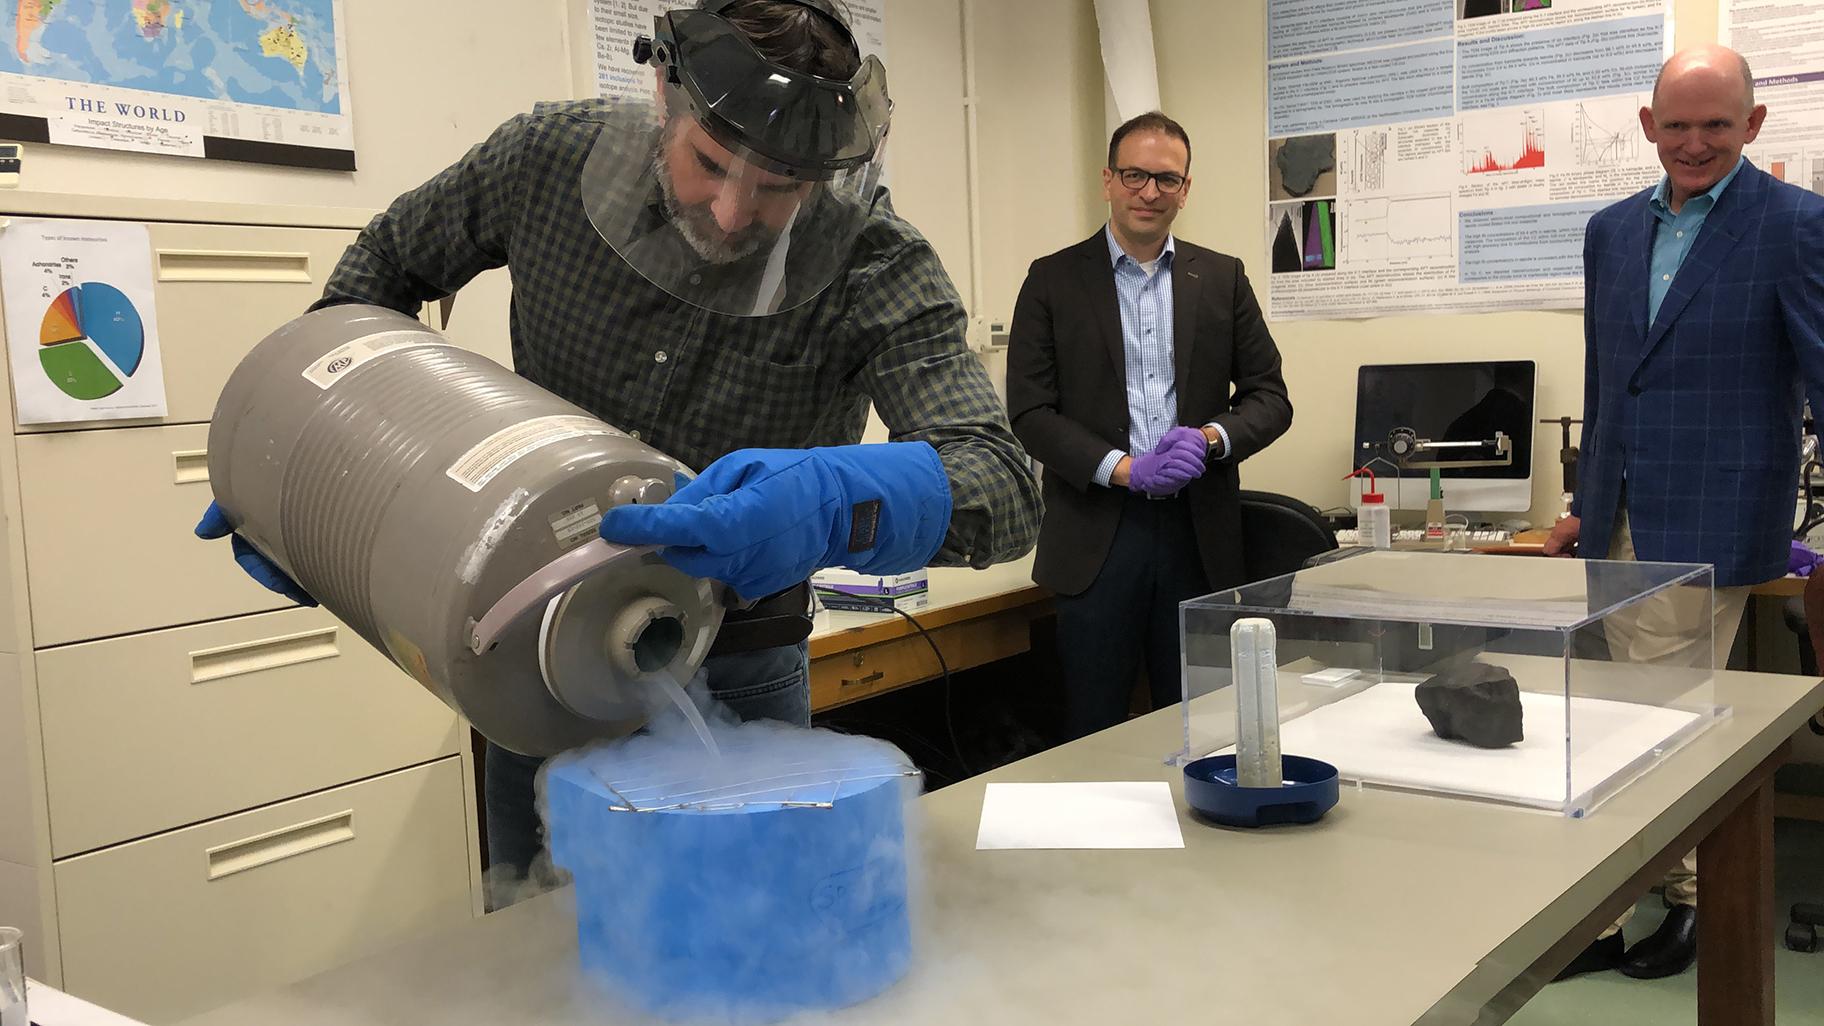 The Field Museum’s Jim Holstein shows how the meteorite will be stored and preserved using liquid nitrogen cooled to negative 320 degrees Fahrenheit. (Alex Ruppenthal / WTTW News) 